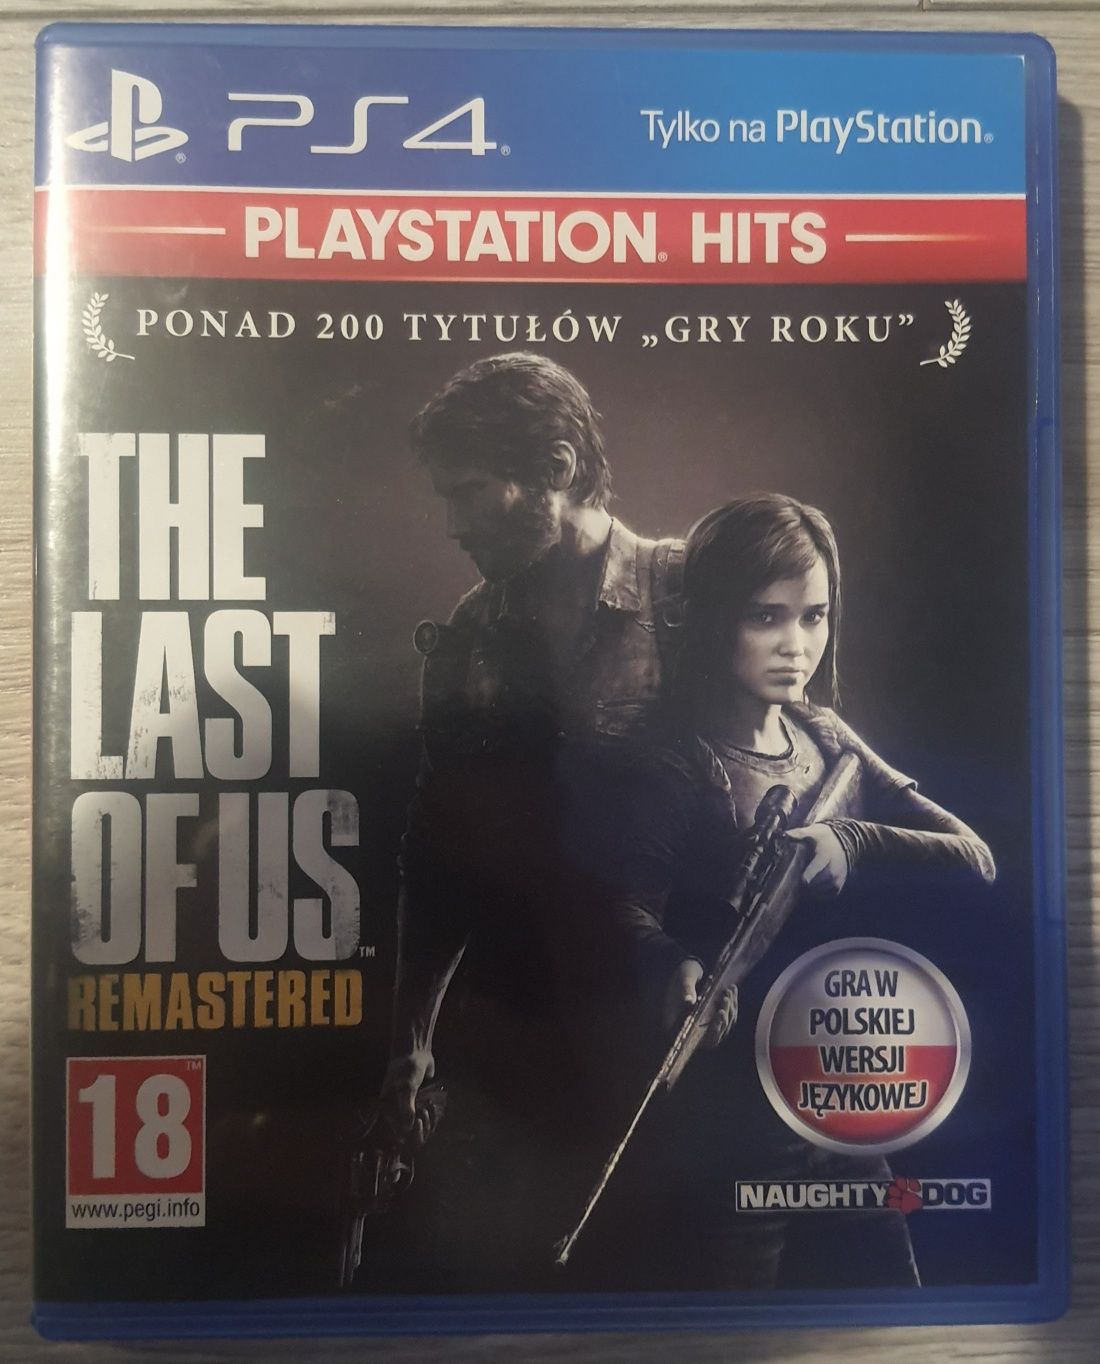 The Last of Us Remastered ps4